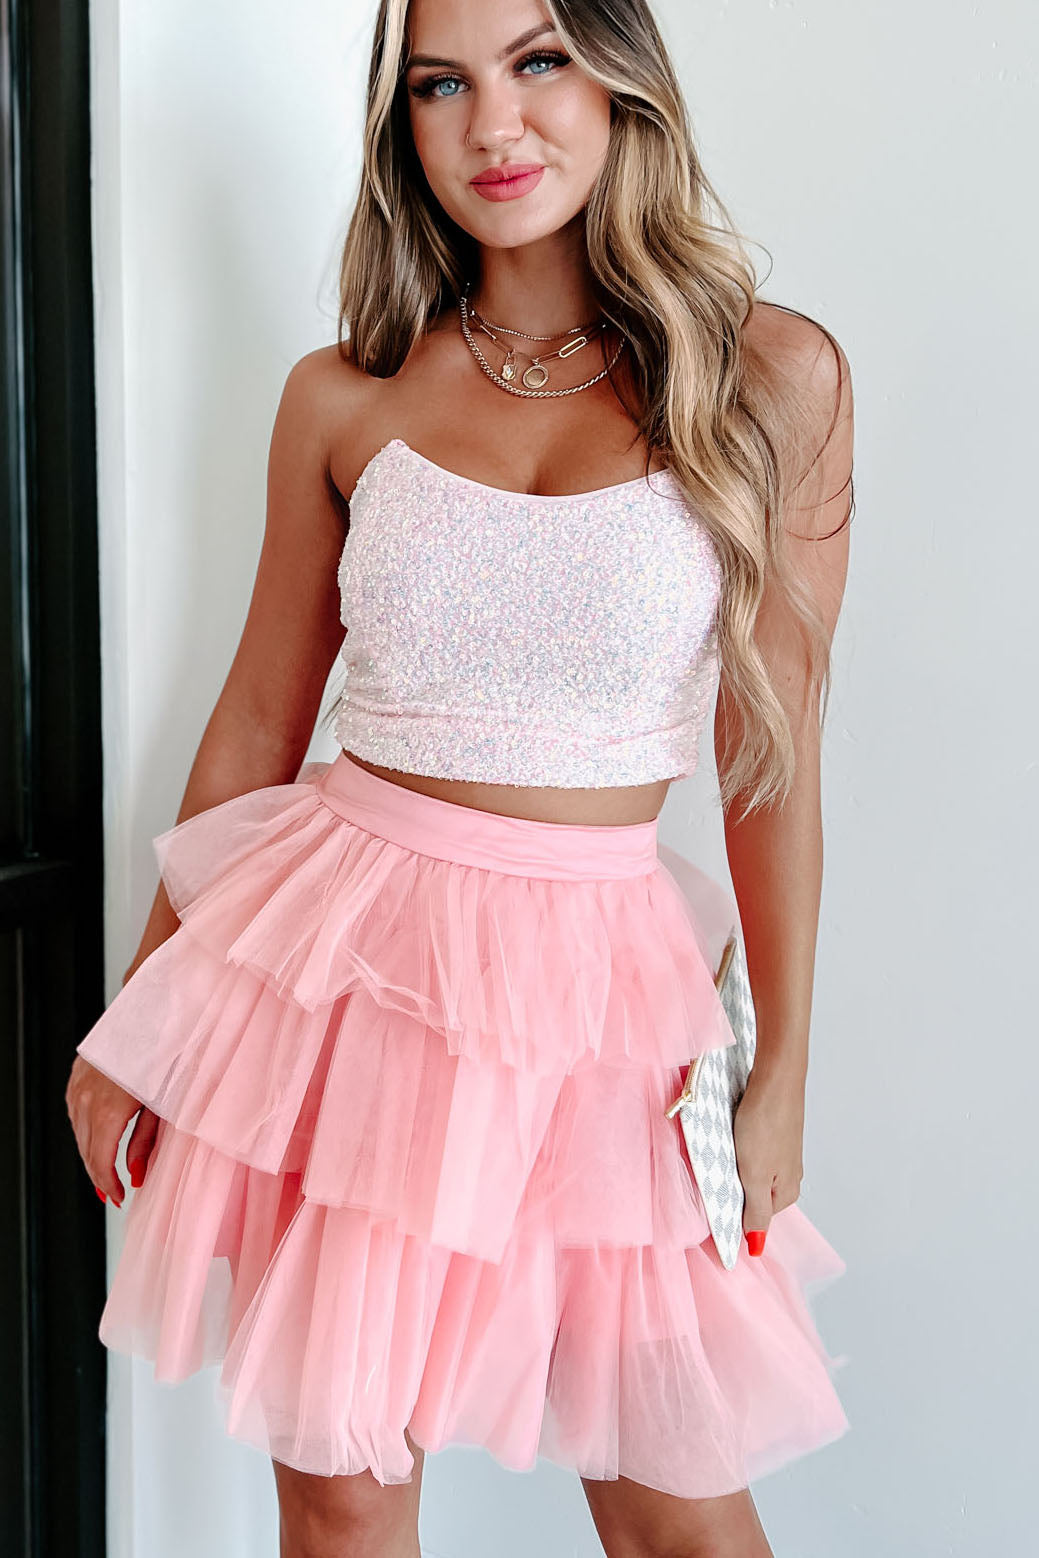 Undeniably Sparkly Sequin Crop Top (Pink) - NanaMacs